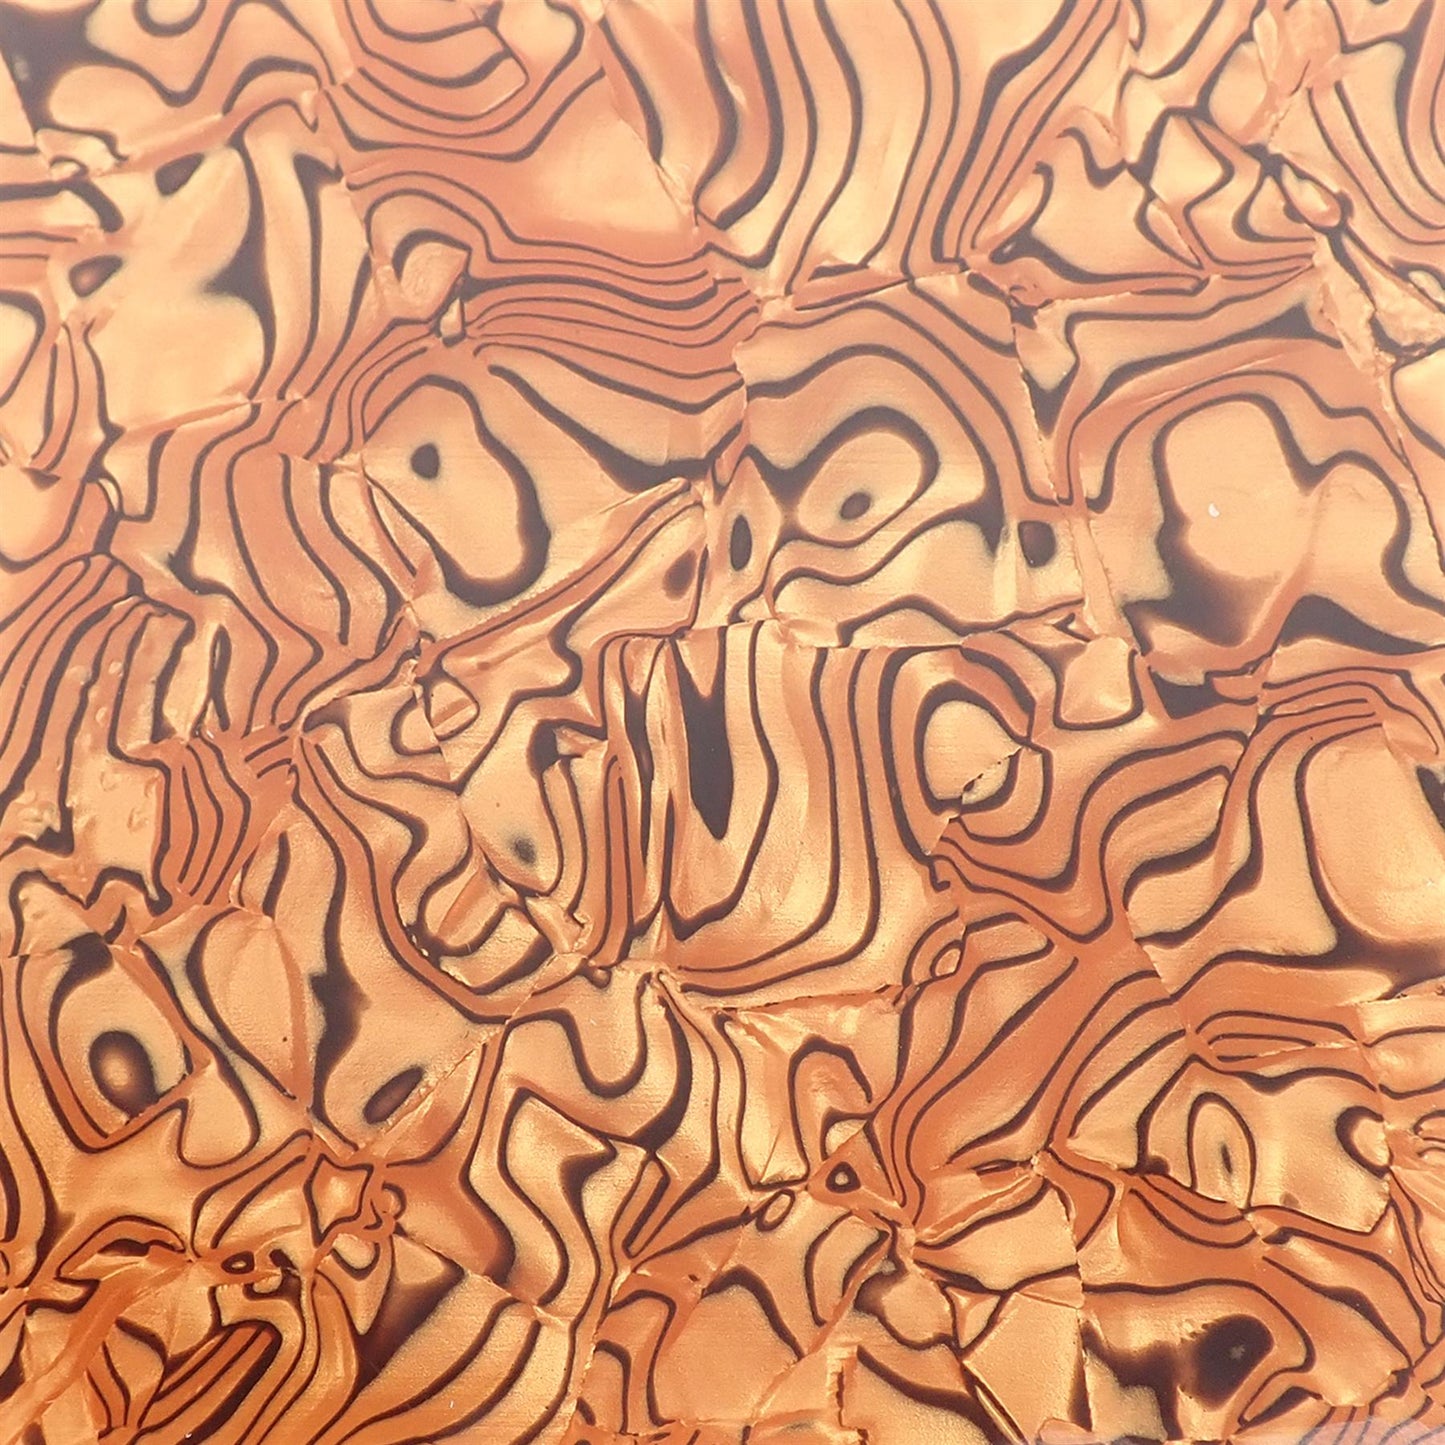 Incudo Brown Tiger Shell Celluloid Laminate Acrylic Sheet - 300x200x3mm (11.8x7.87x0.12")